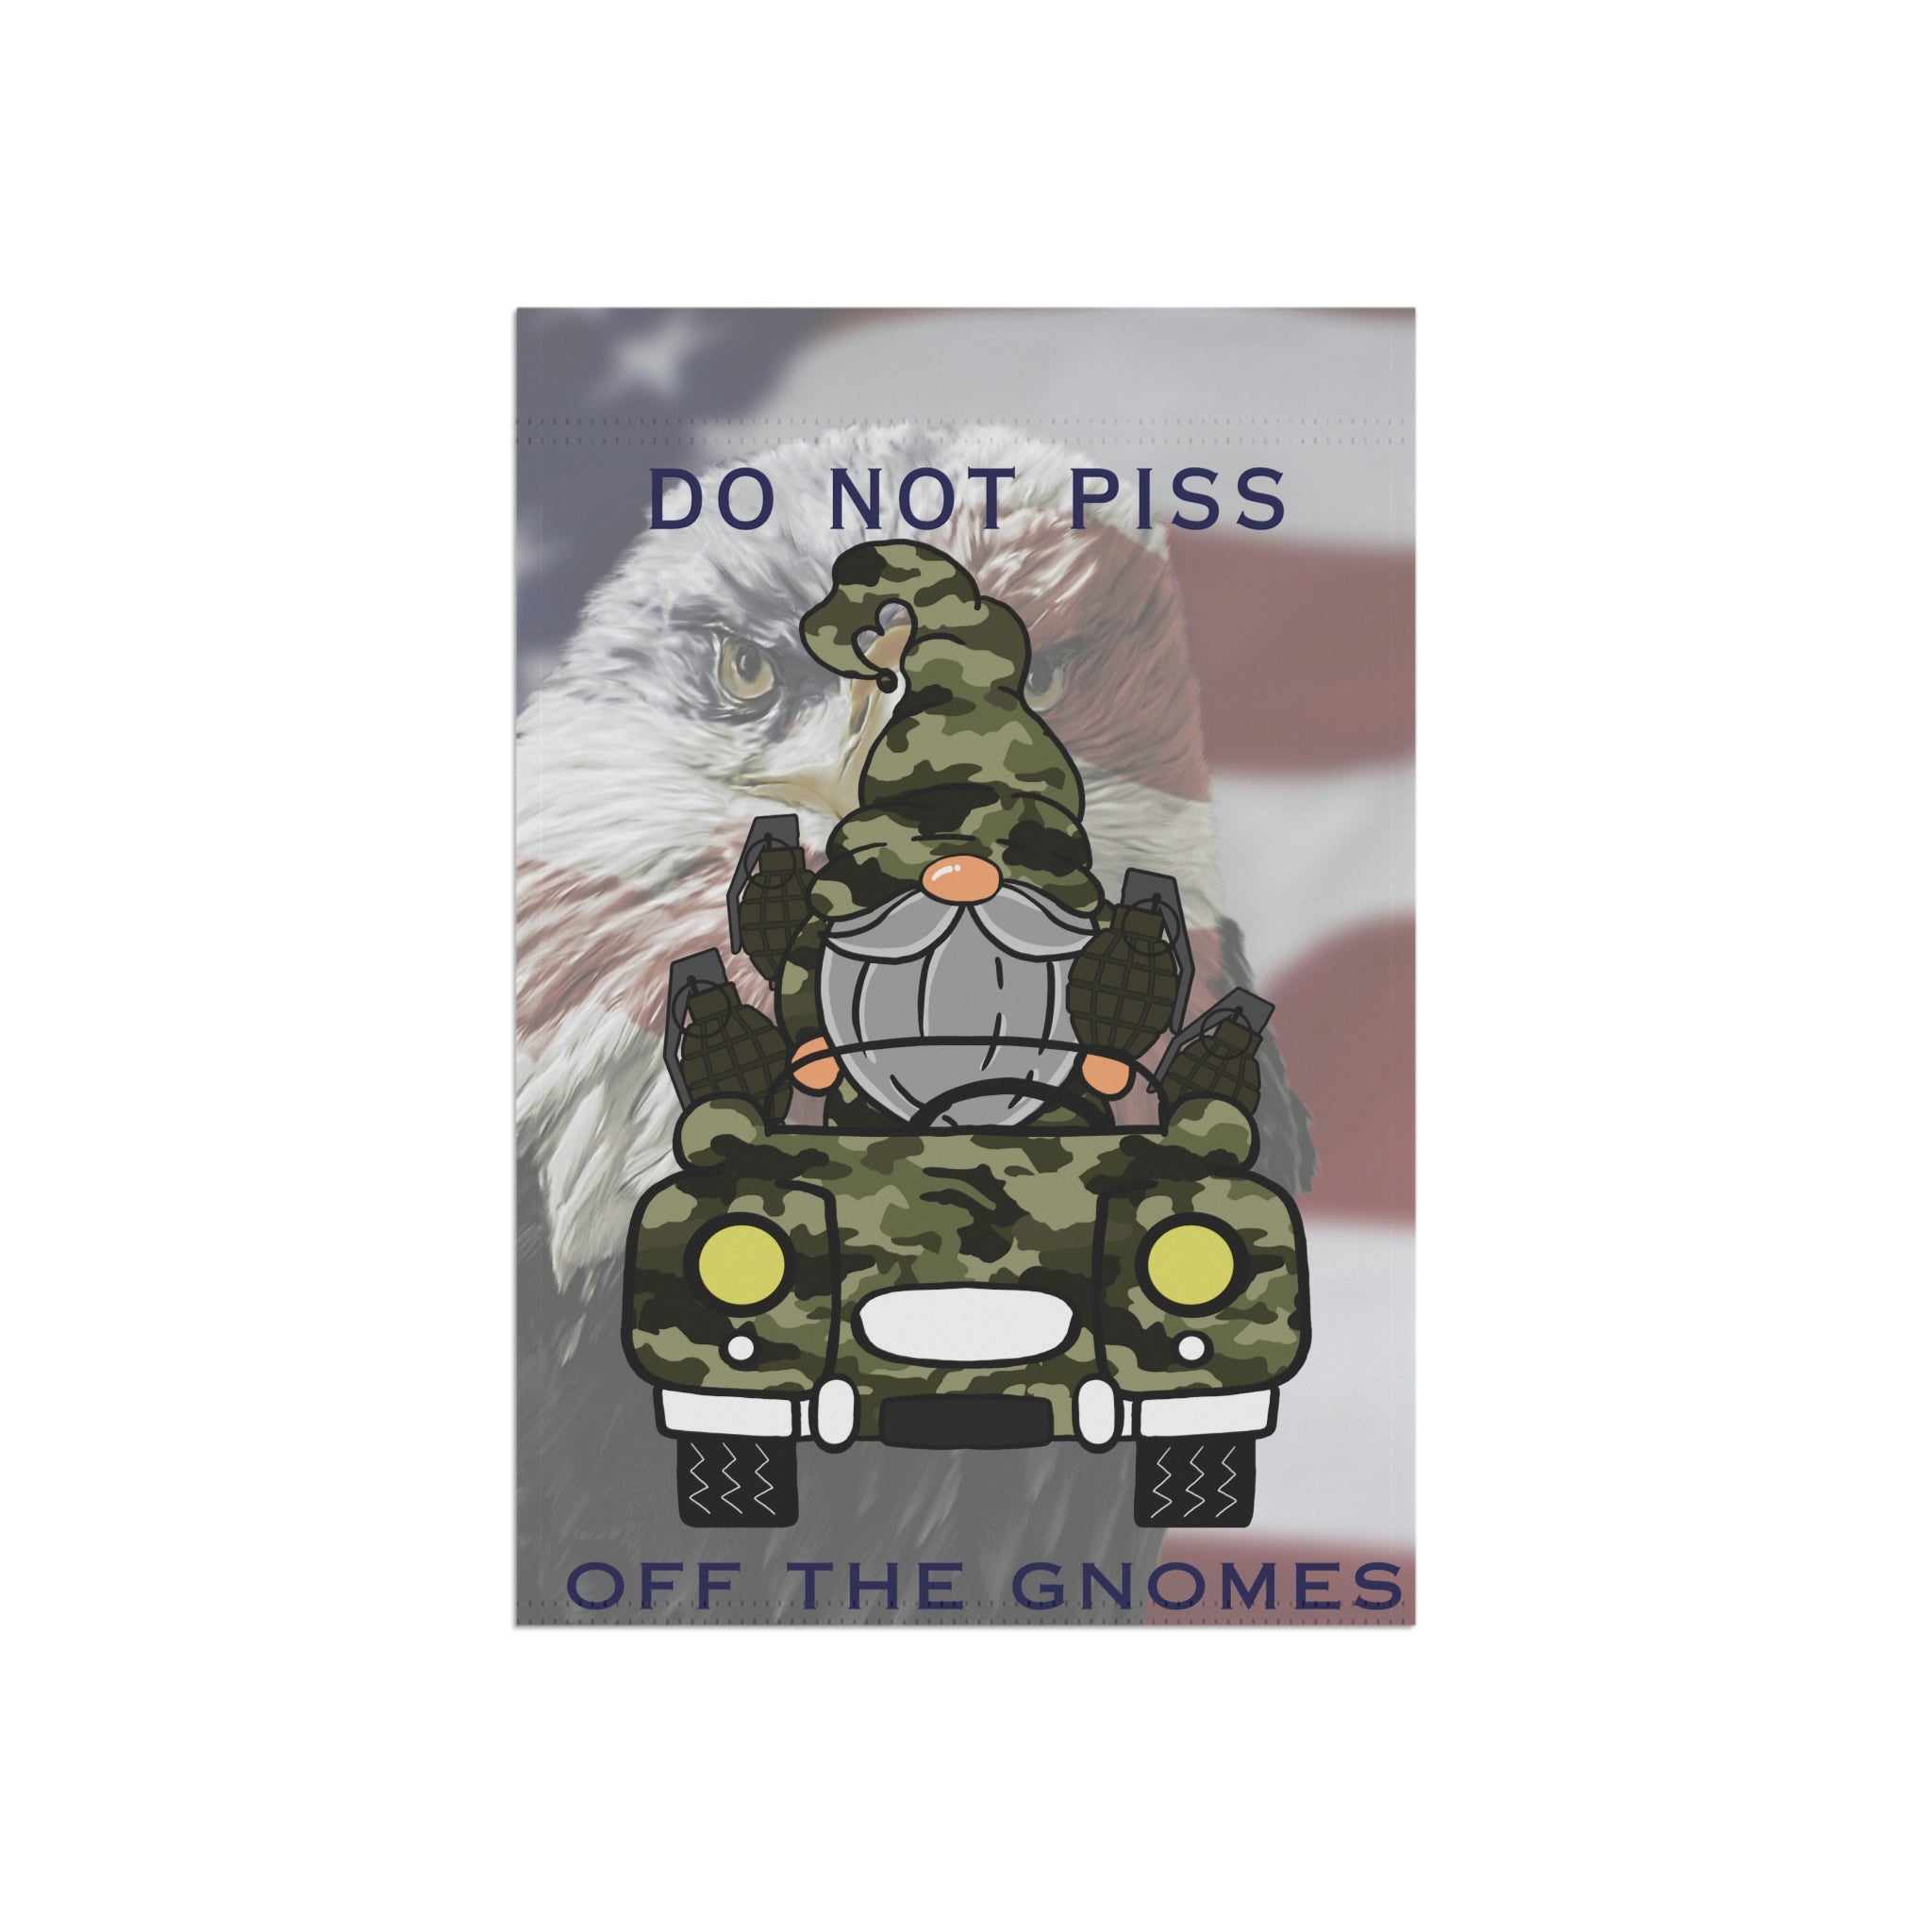 Gnome Lover Sign | Garden Flag | Gnome Lover Gift | Do Not Piss Off The Gnomes Flag